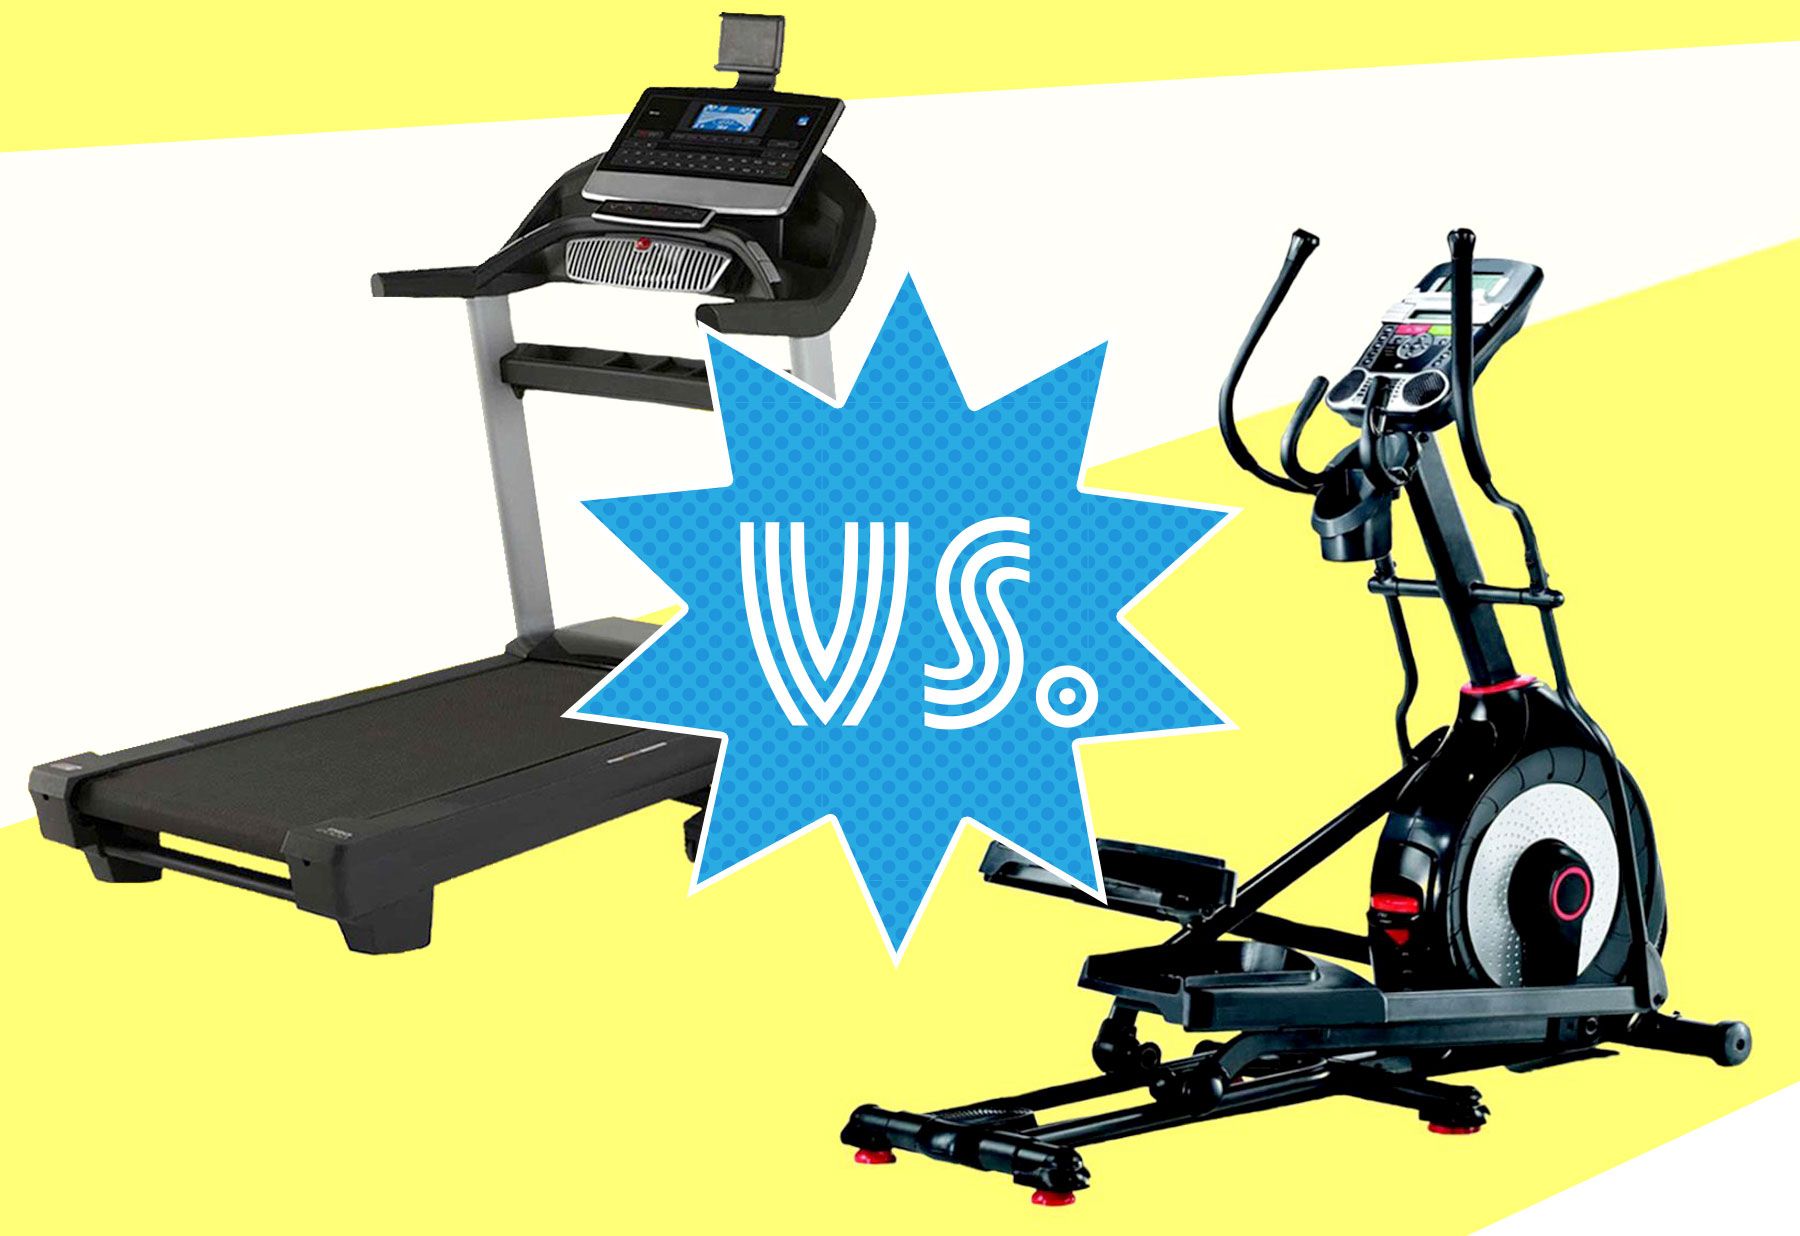 TREADMILL VS. ELLIPTICAL TRAINER: WHICH IS BETTER FOR ARTHRITIC KNEES?